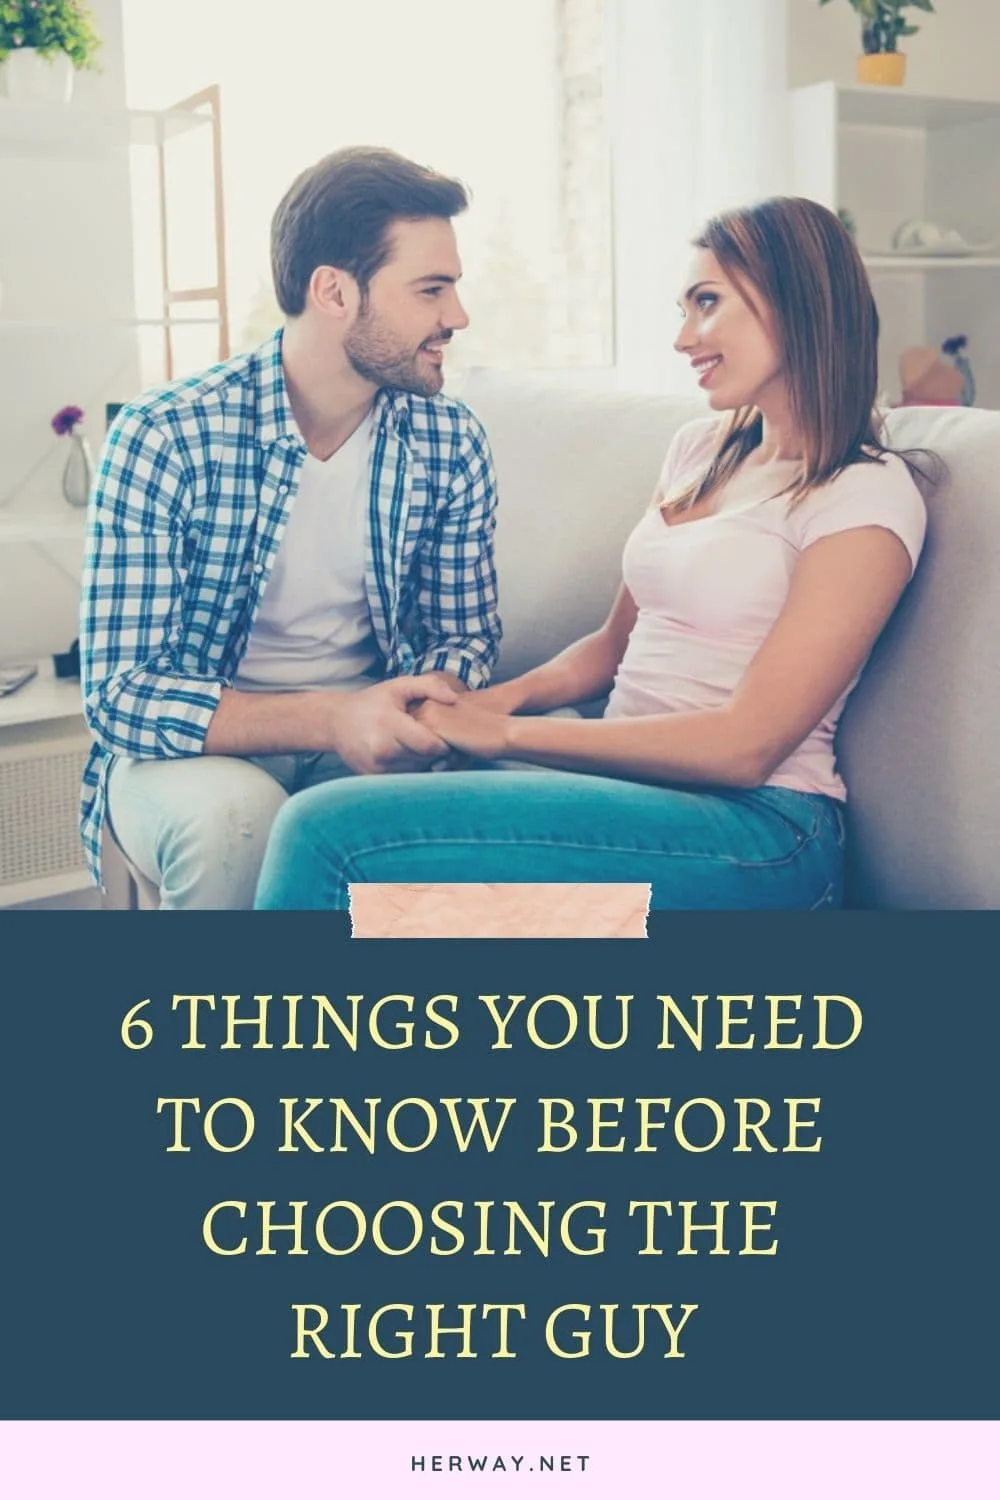 6 Things You Need To Know Before Choosing The Right Guy